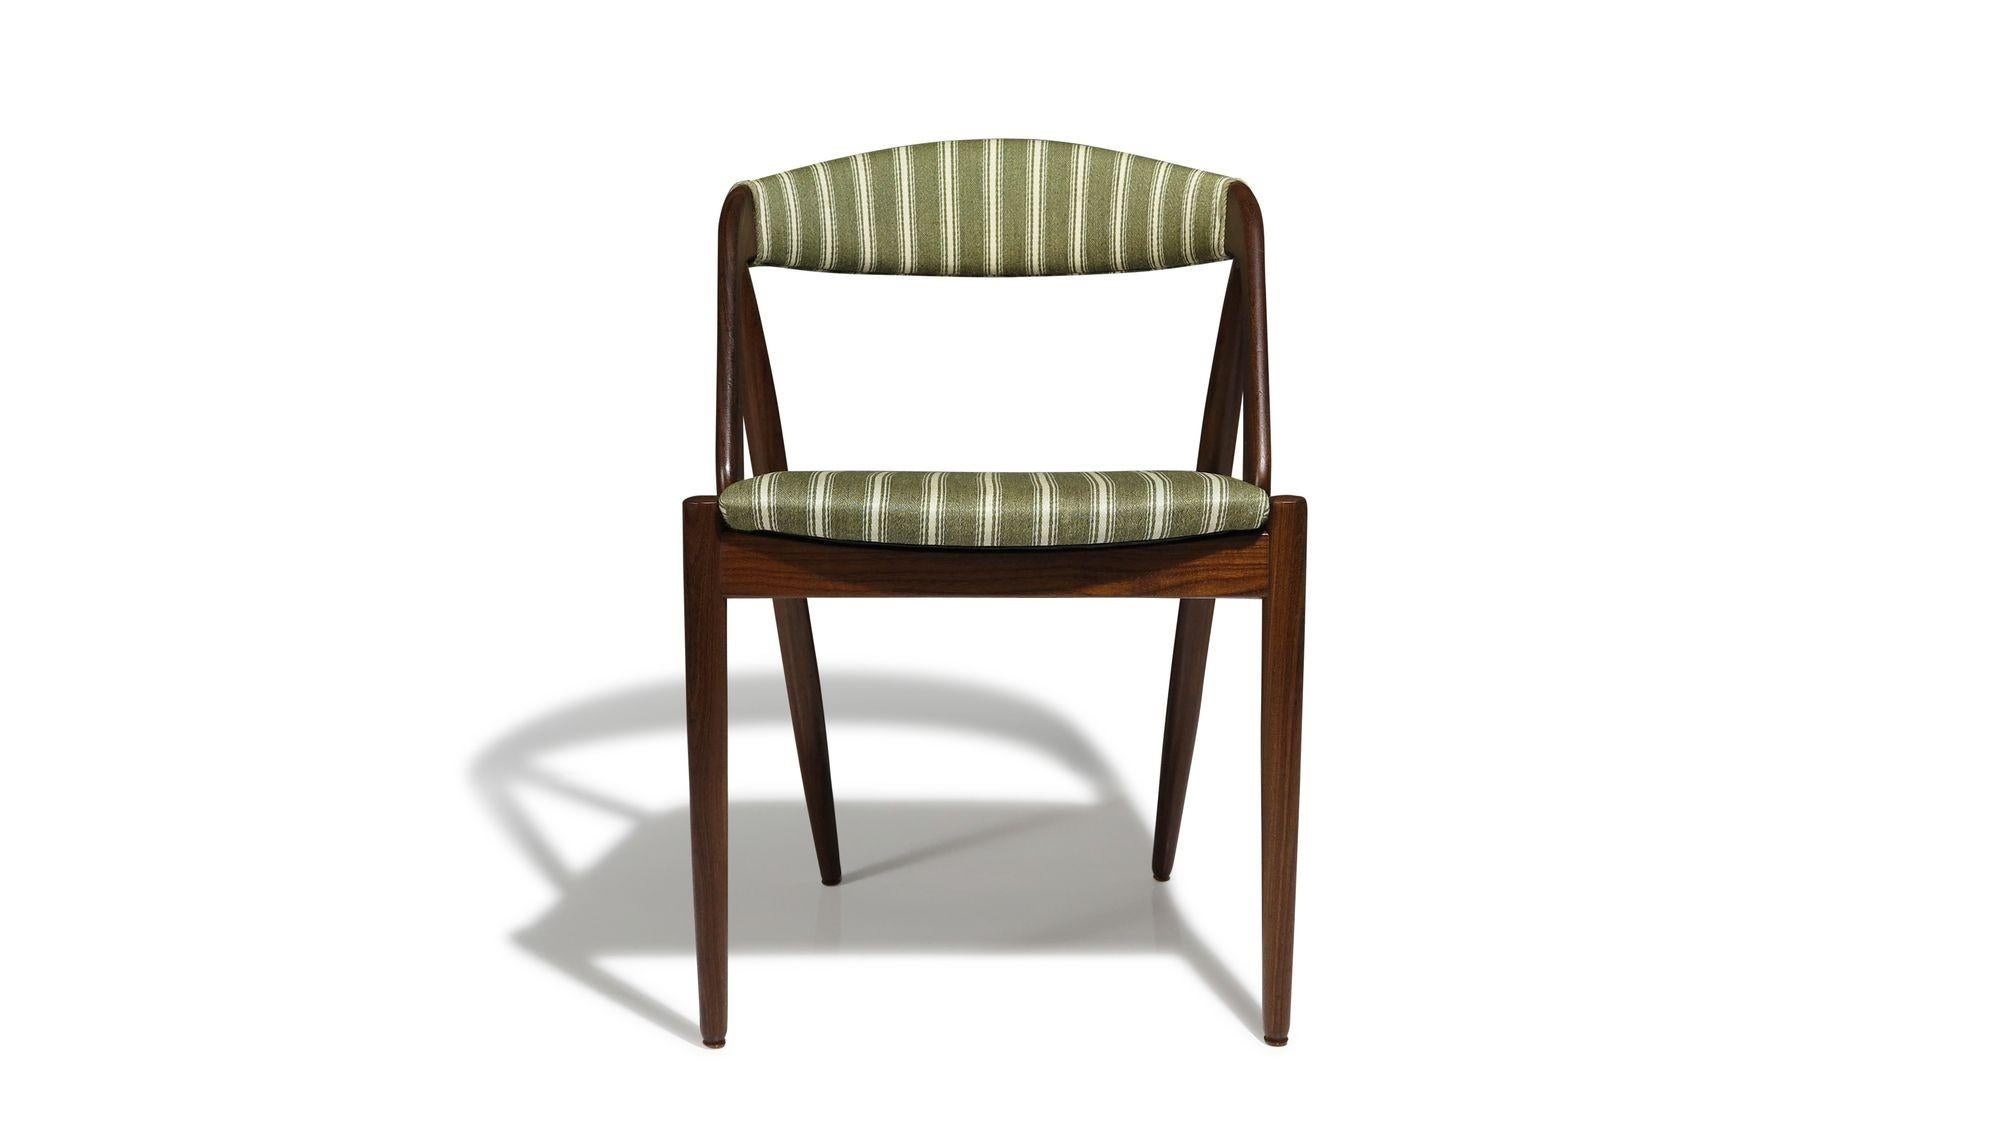 Six Kai Kristiansen Danish Dining Chairs in Original Striped Wool In Good Condition For Sale In Oakland, CA